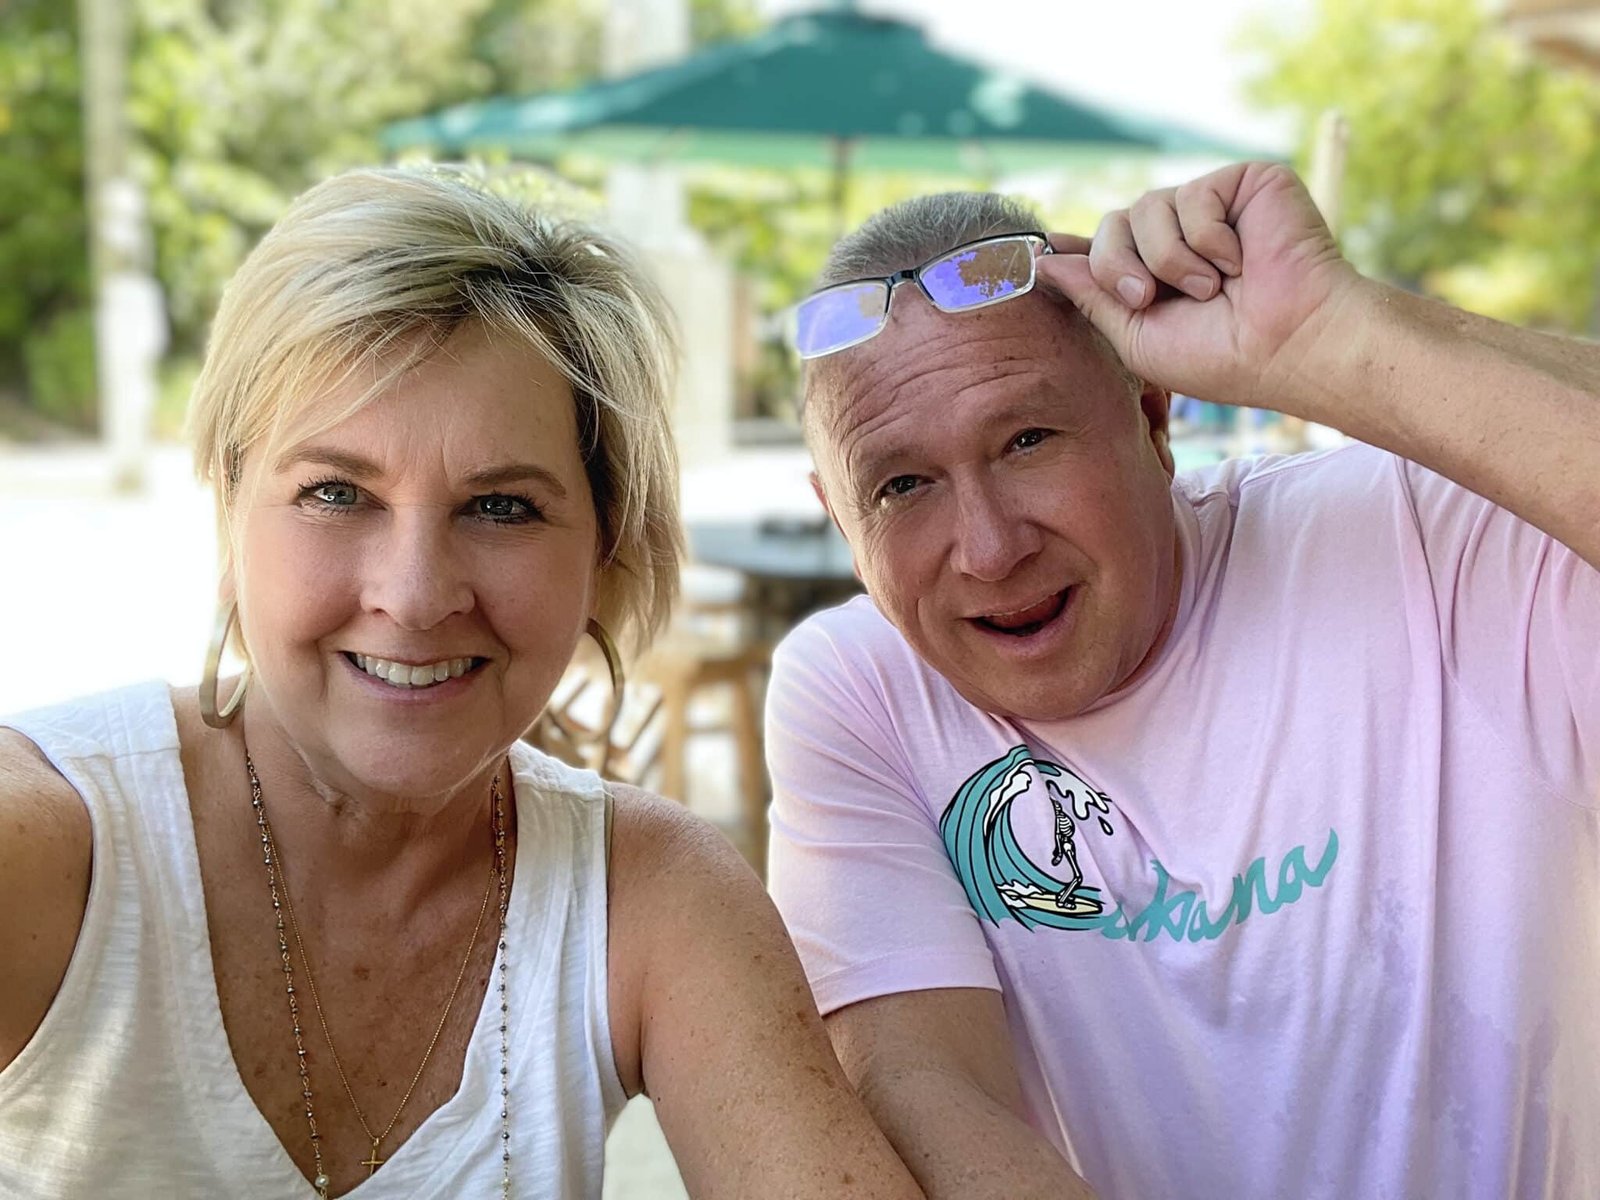 Over 40 Fashion Blogger, Tania Stephens and her husband Joe on vacation in Belize